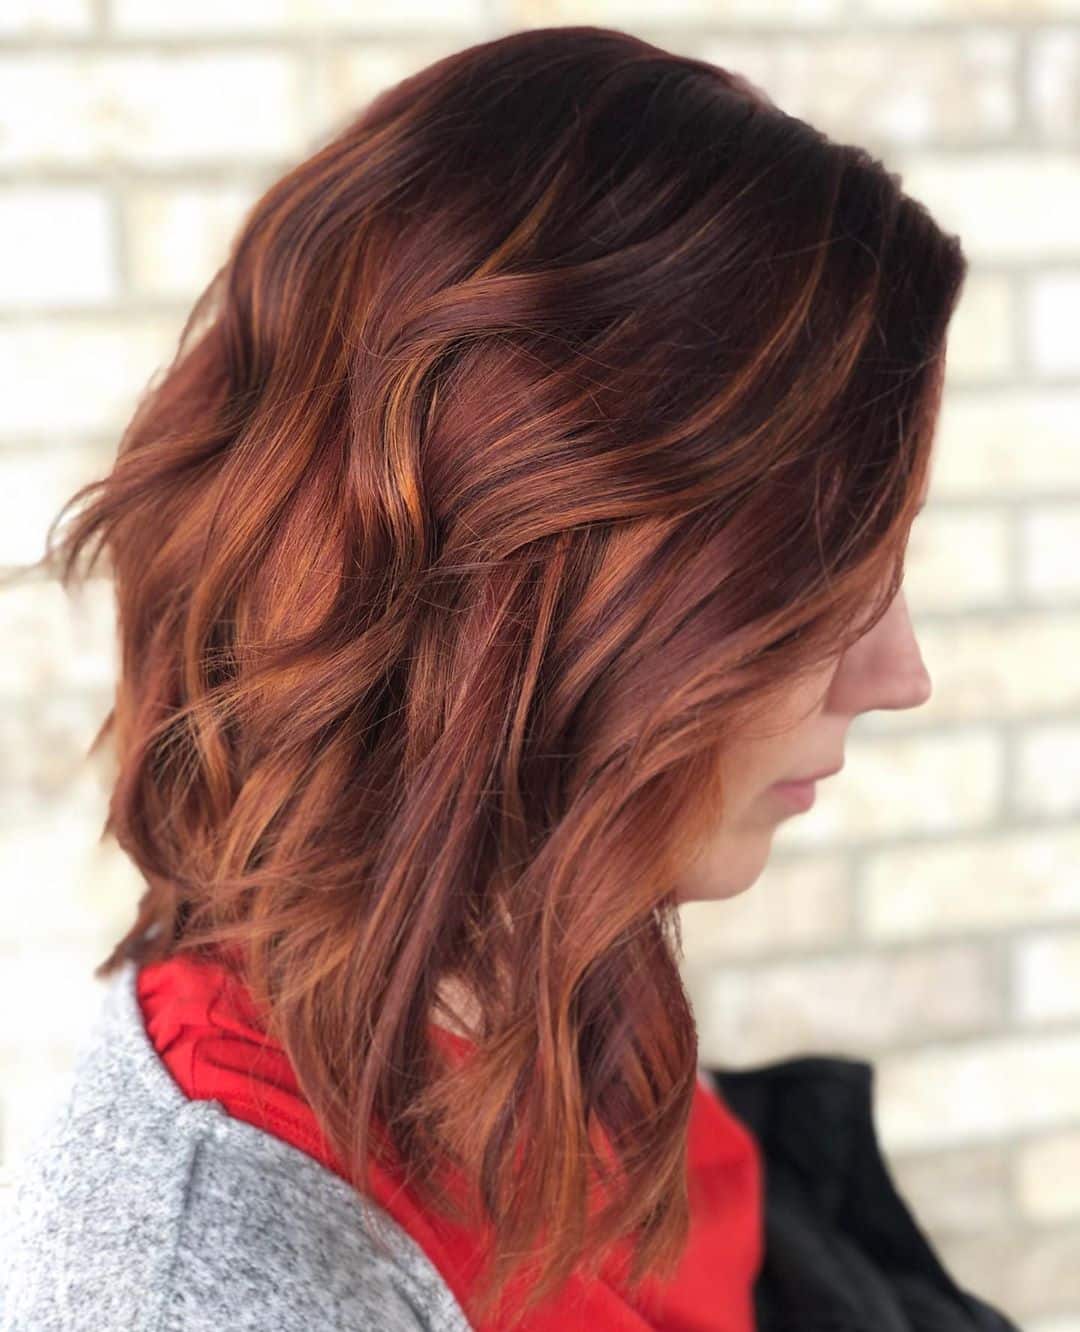 Shoulder-Length Dark Red Hair with Copper Highlights